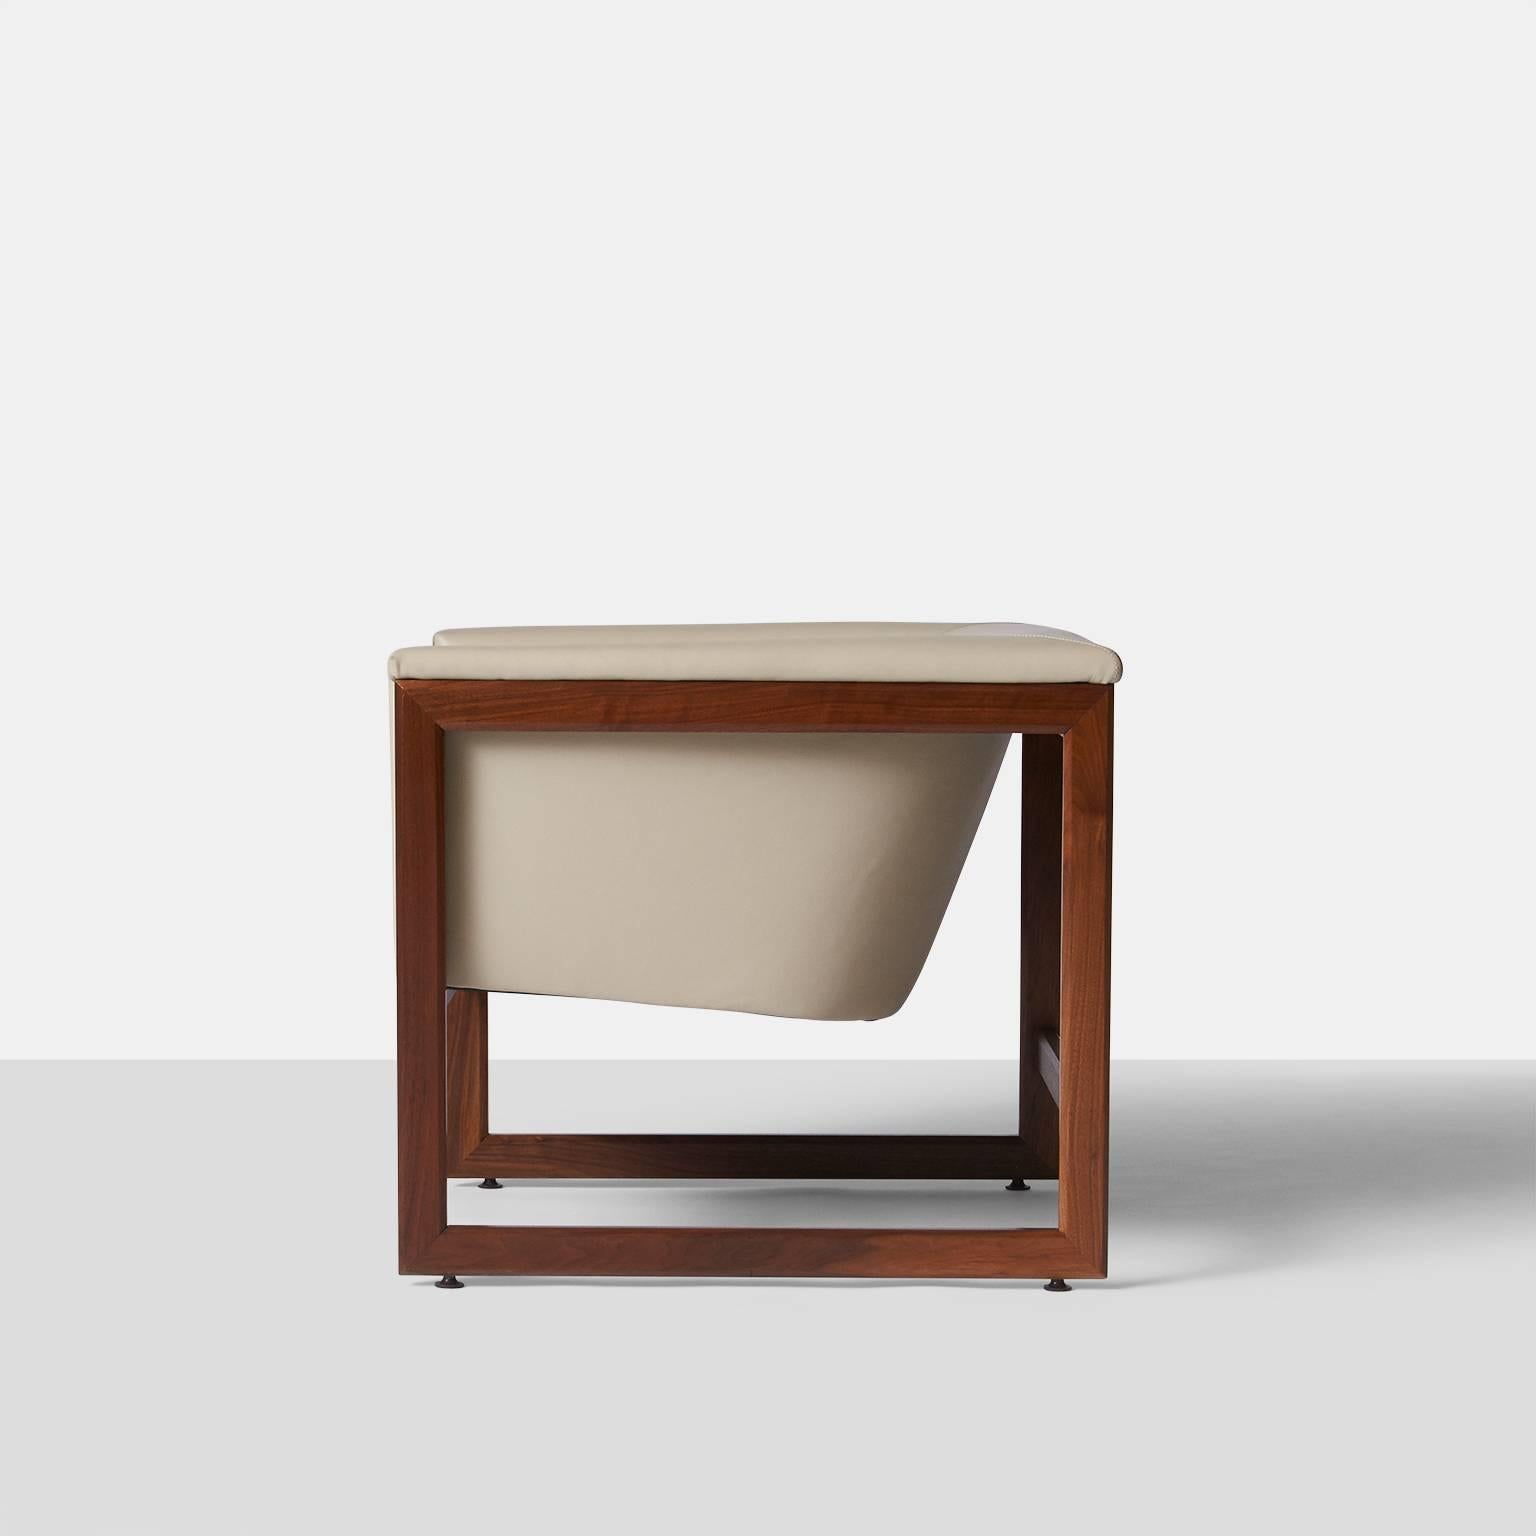 American Pair of Floating Cube Chairs by Milo Baughman